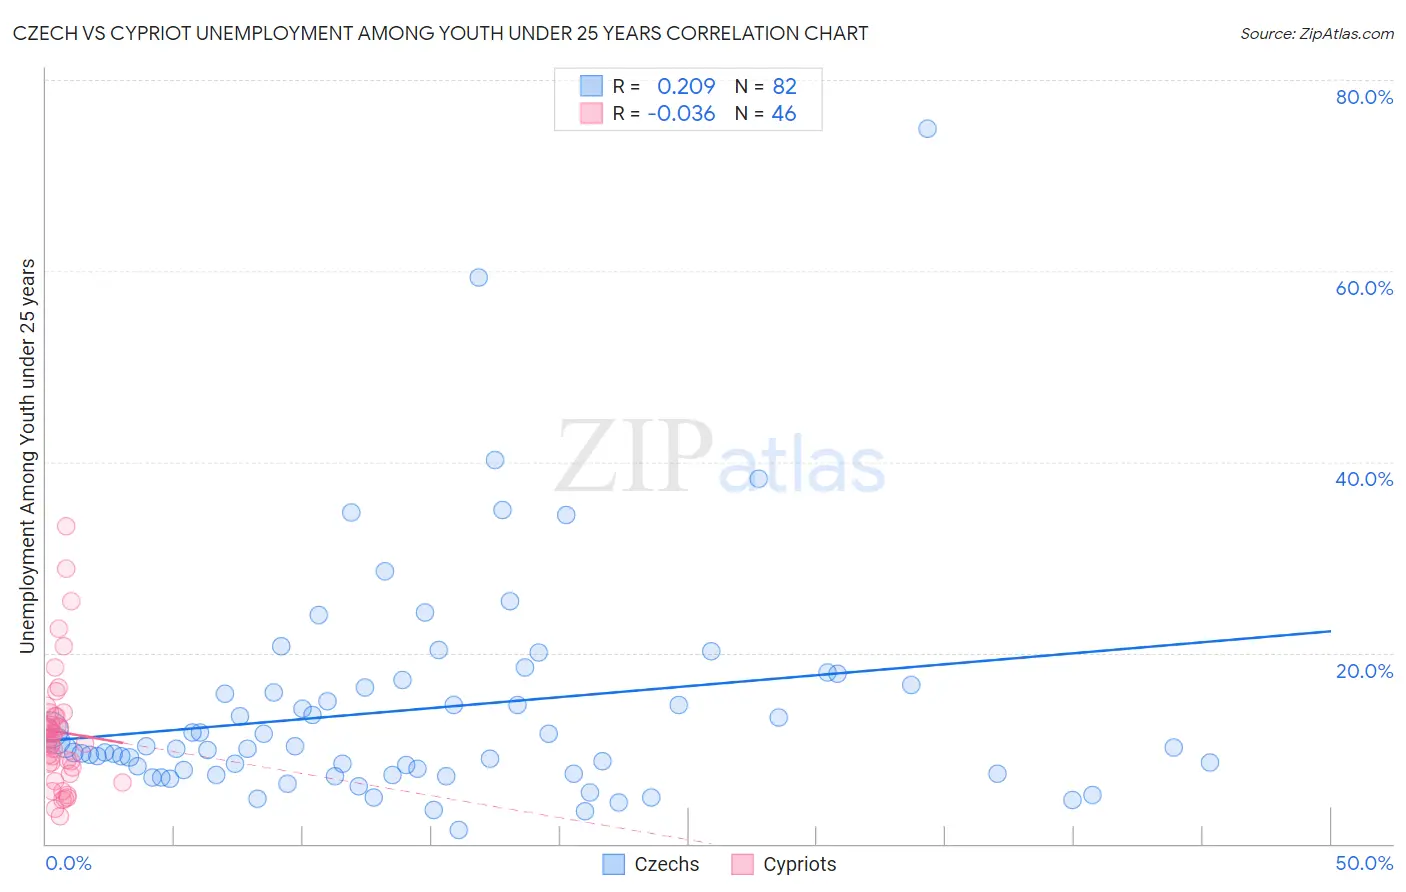 Czech vs Cypriot Unemployment Among Youth under 25 years